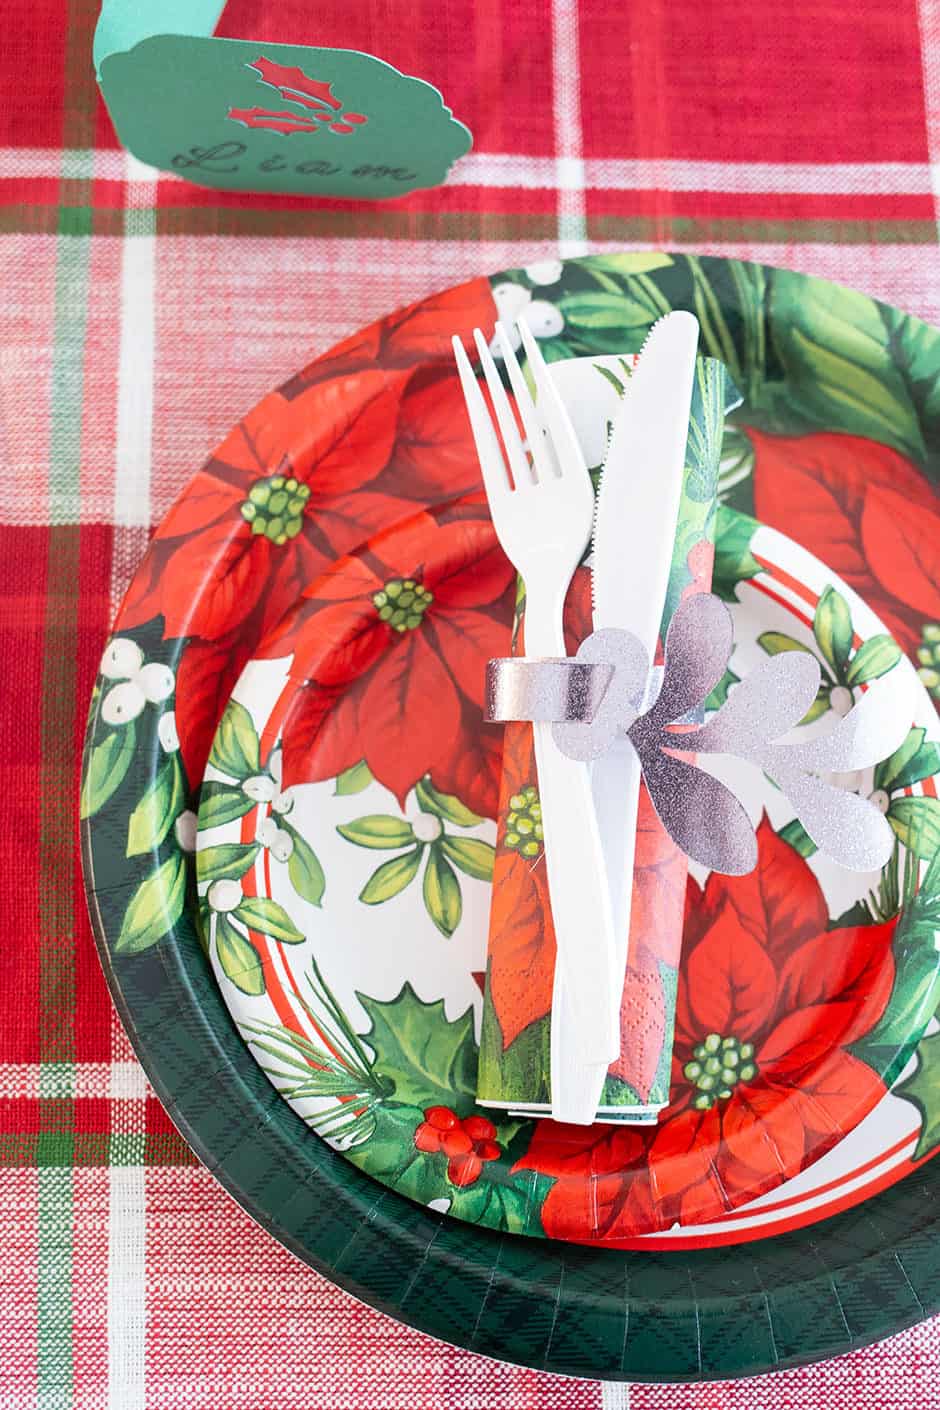 Looking for an affordable, kid-friendly Christmas tablescape? Well, pull out your Cricut Maker machine and get to crafting because these three simple DIY holiday decorations will dress up even the simplest of holiday tables.